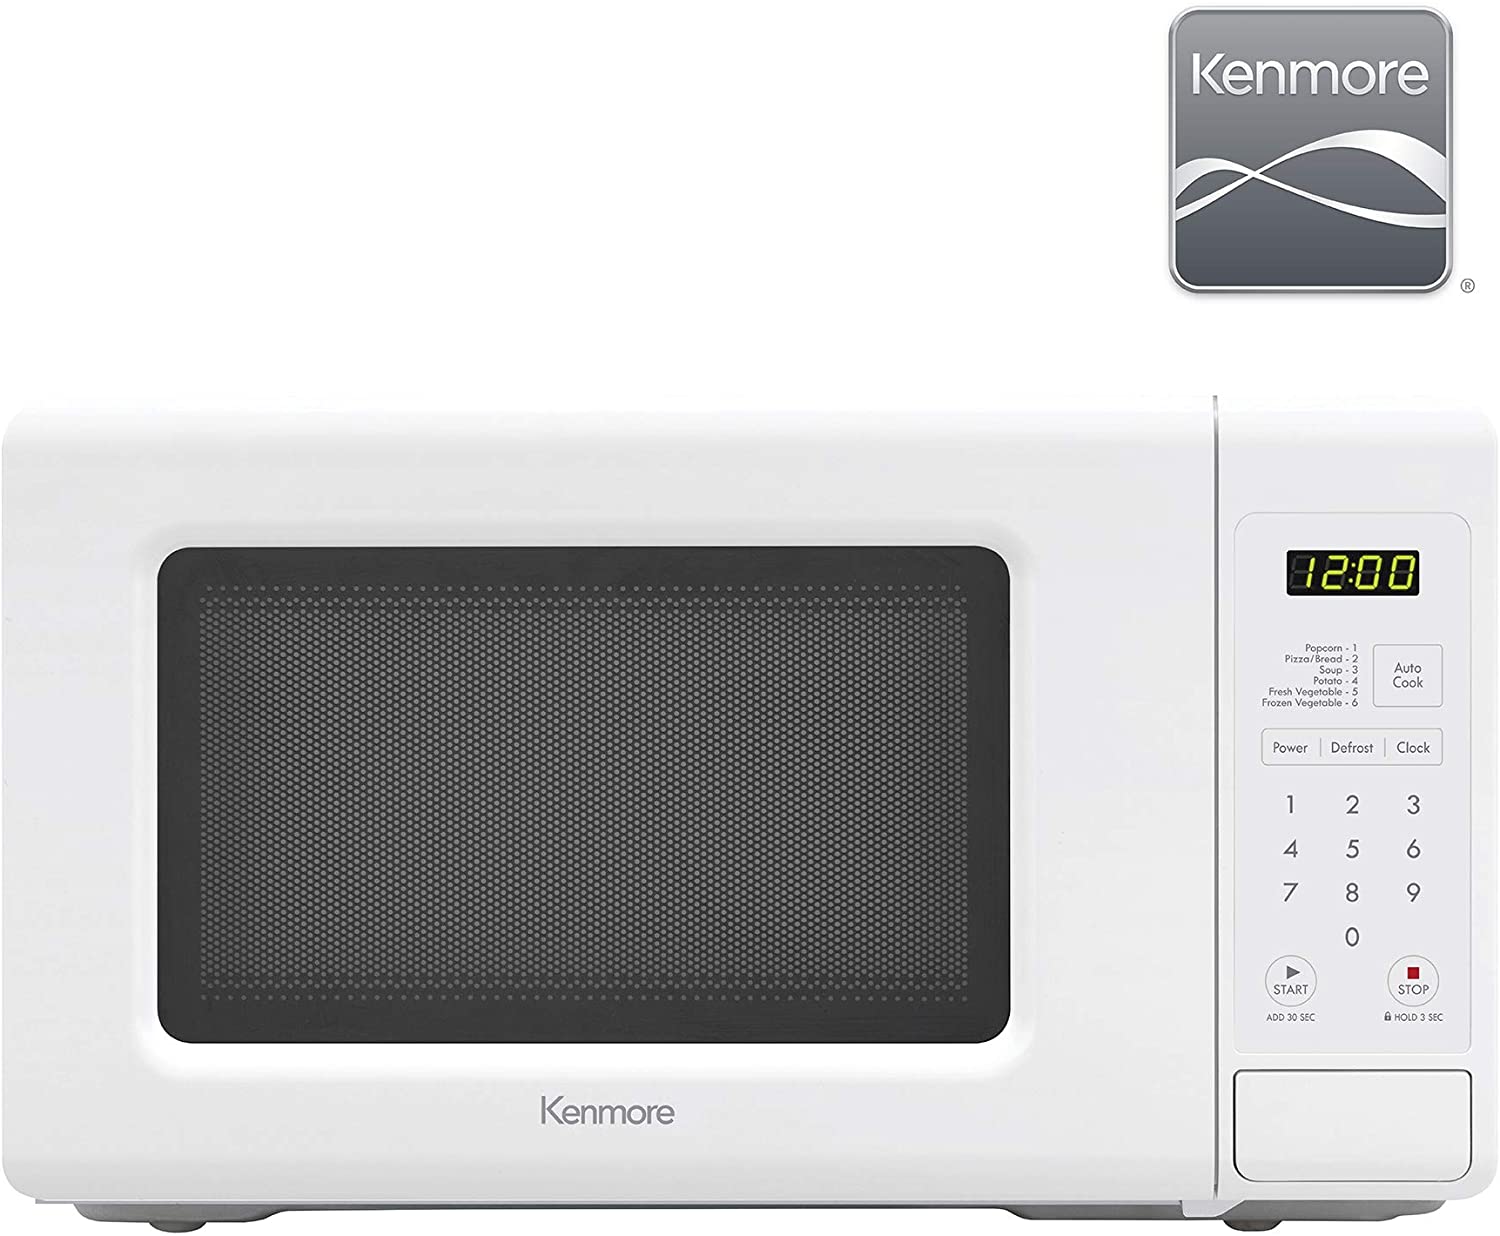 Kenmore 70722 0.7 cu. ft Compact